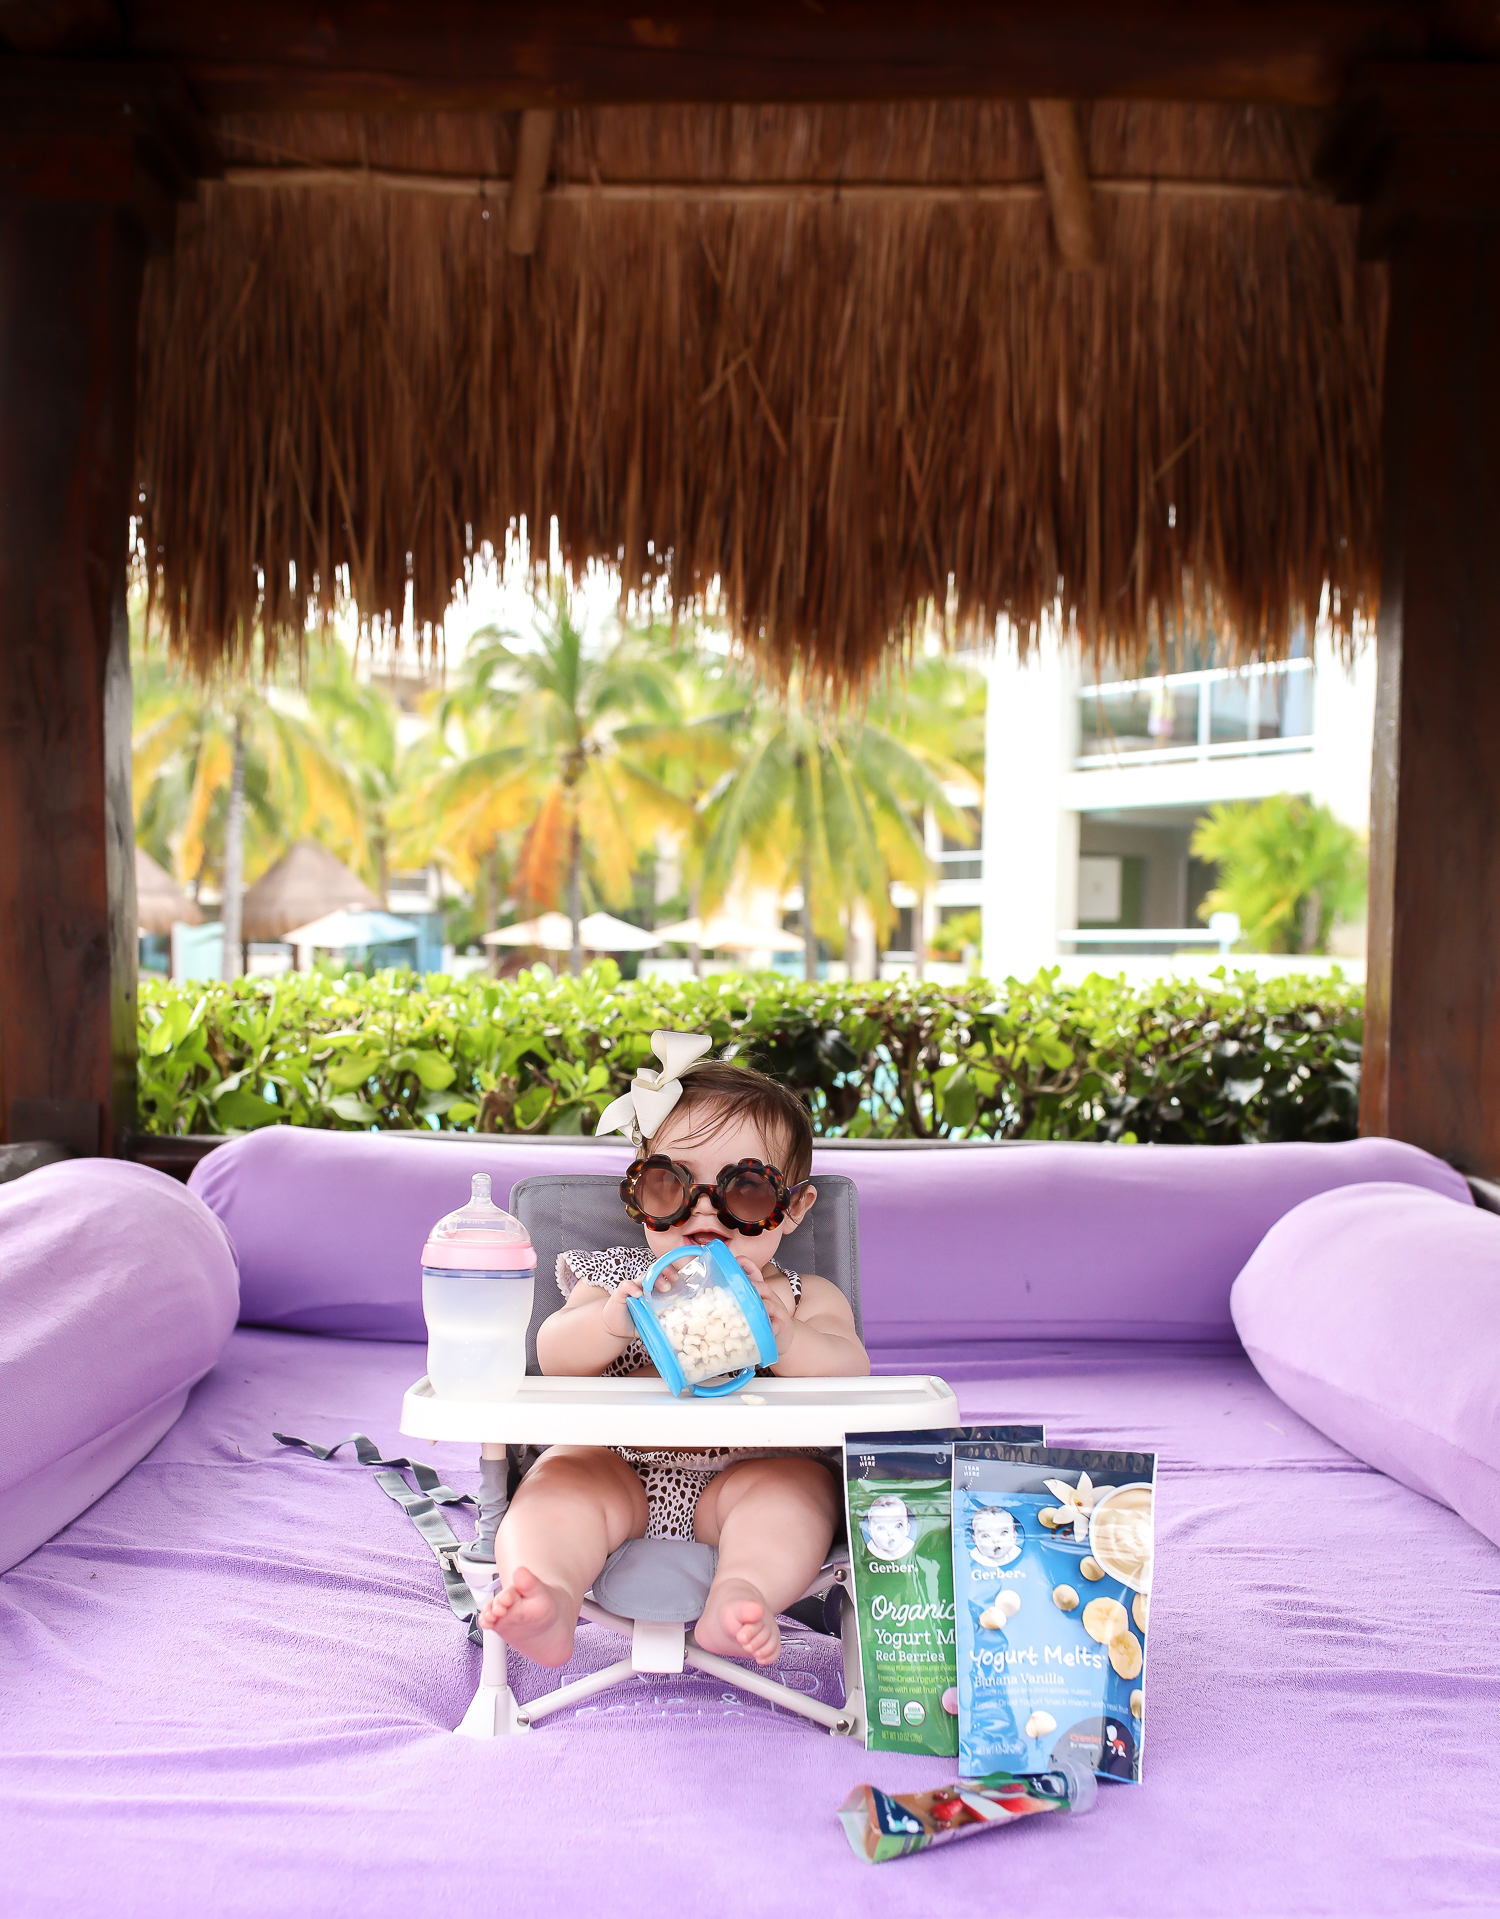 Christmas In Cancun🌟🎄🎁 [+ A Few Baby Travel Must-Haves] by popular Oklahoma travel blog, The Sweetest Thing: image of a baby in Cancun, Mexico sitting in a Walmart hiccapop Omniboost Travel Booster Seat with Tray for Baby holding a Walmart Munchkin Snack Catcher Snack Cup with Gerber Puff cereal snack inside, with a bottle resting on her high chair tray and some Gerber Organic Yogurt melts next to her high chair. 